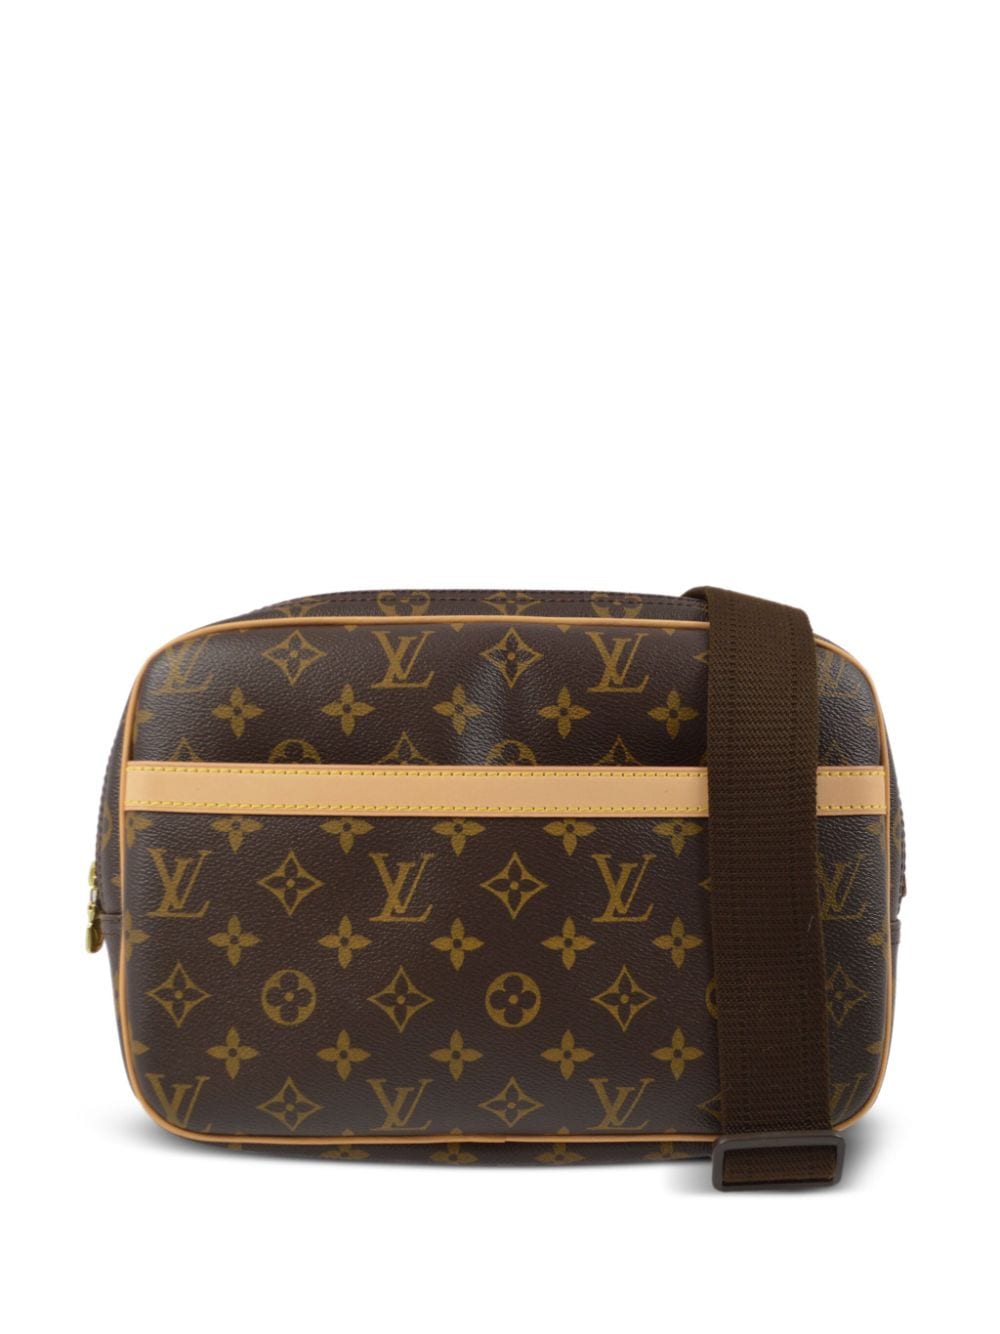 Louis Vuitton Pre-Owned 2009 Reporter PM Schultertasche - Braun von Louis Vuitton Pre-Owned